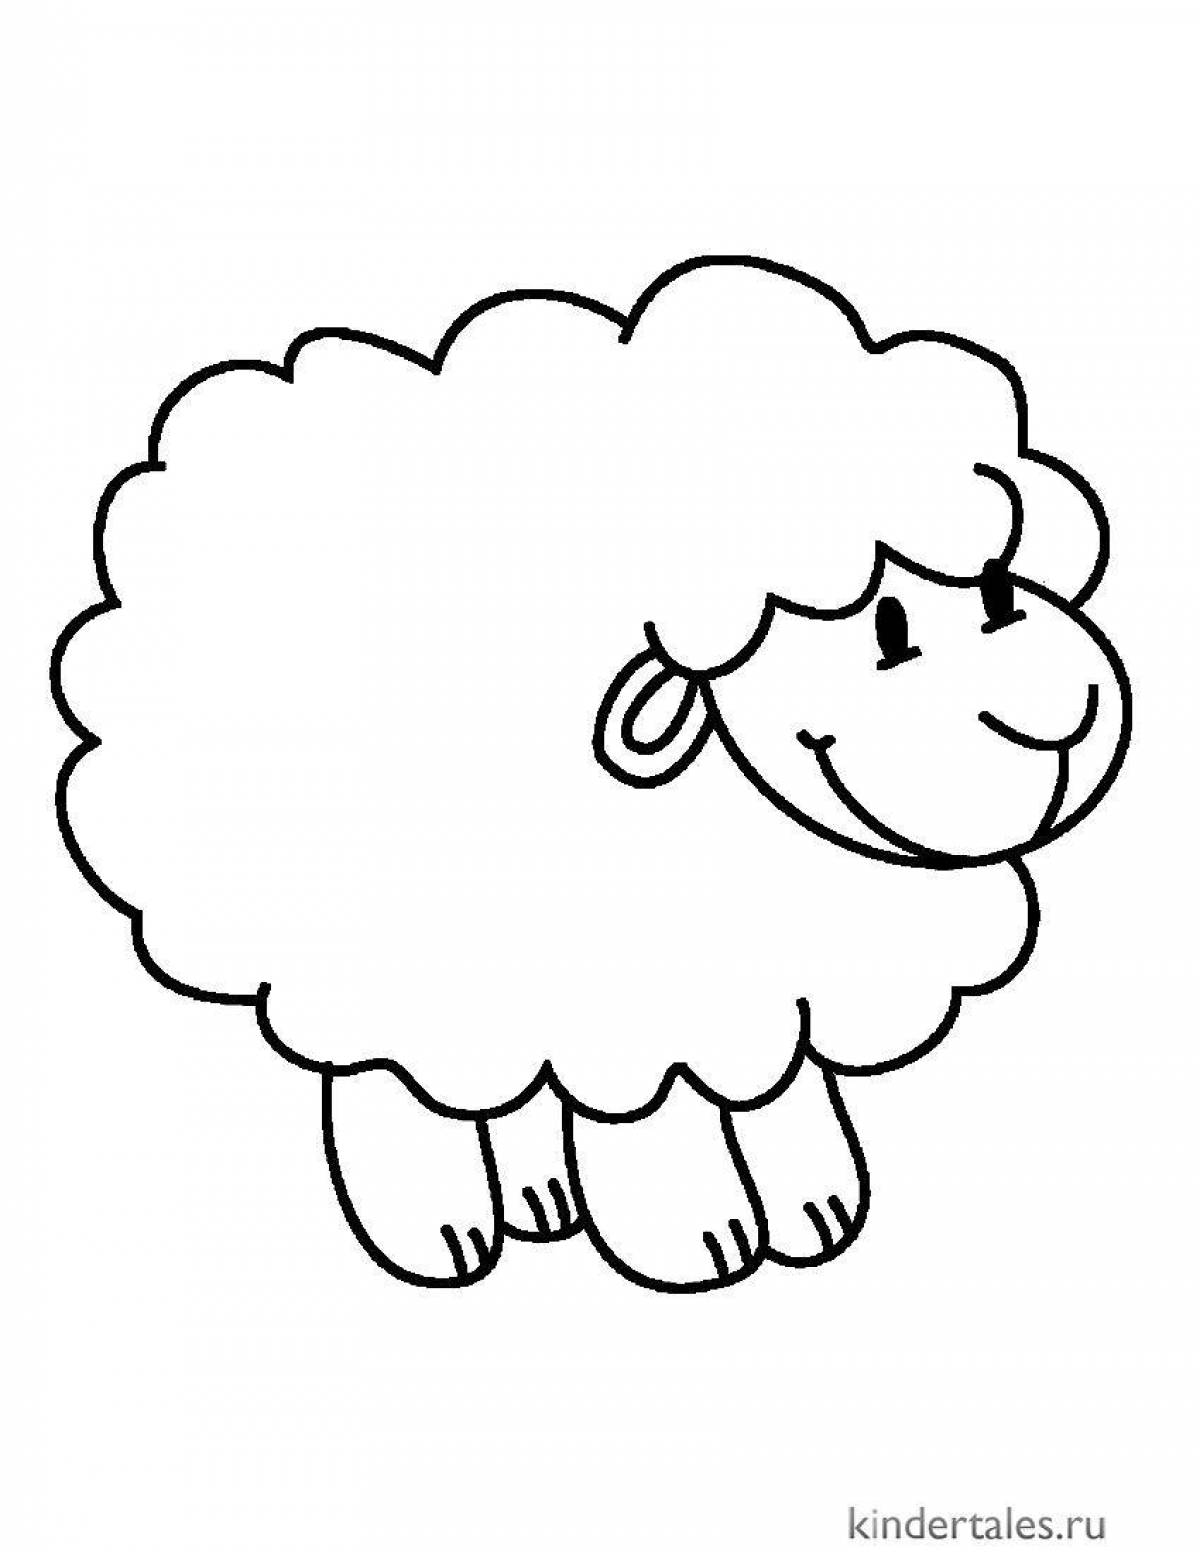 Fantastic sheep coloring book for 3-4 year olds